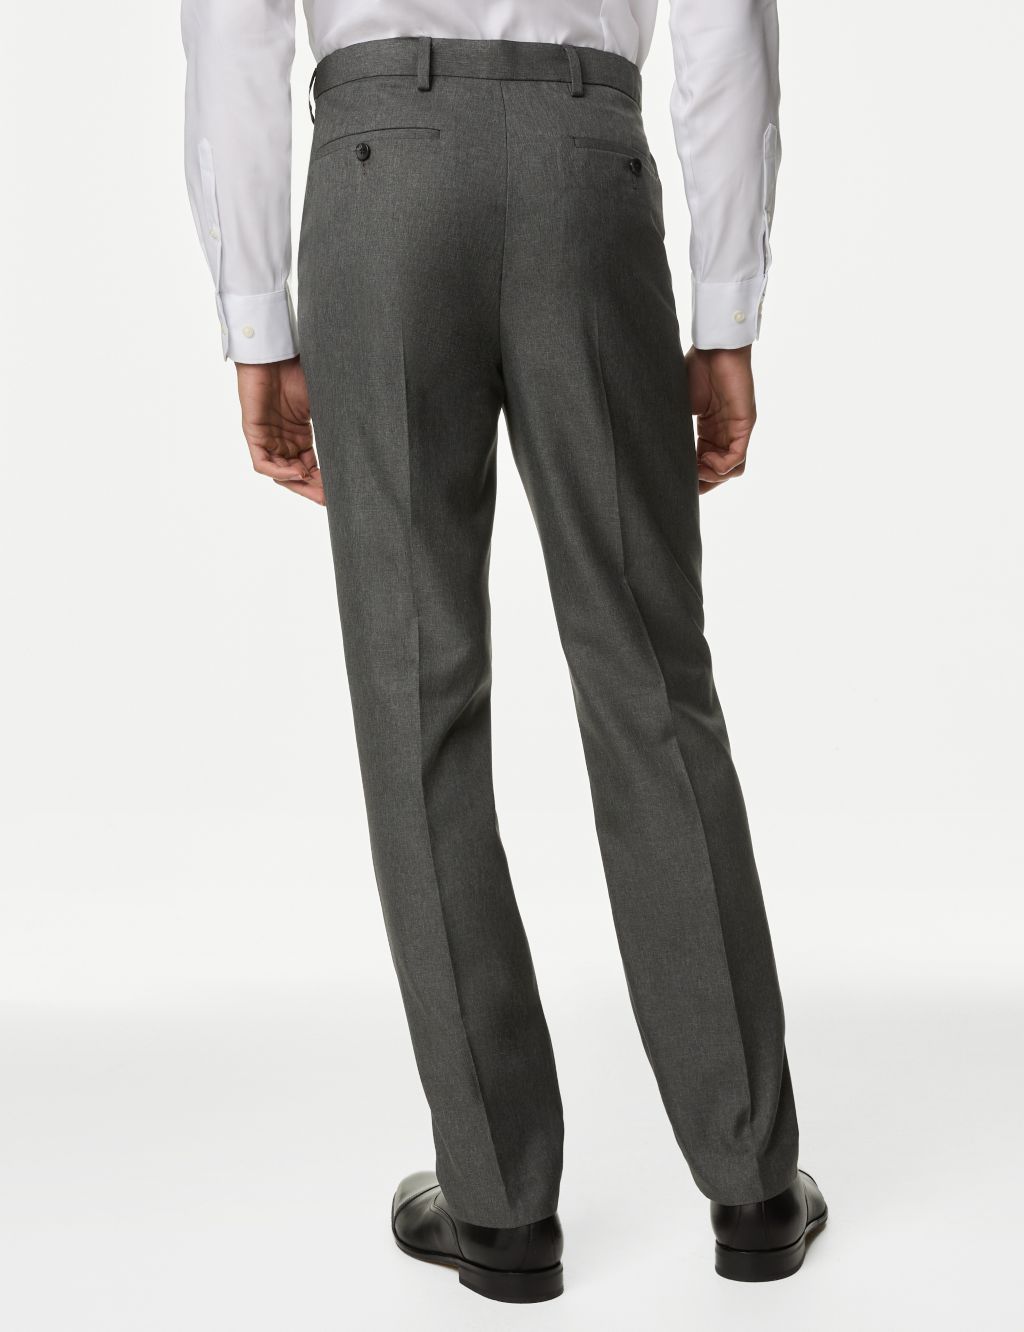 Regular Fit Trouser with Active Waist image 4